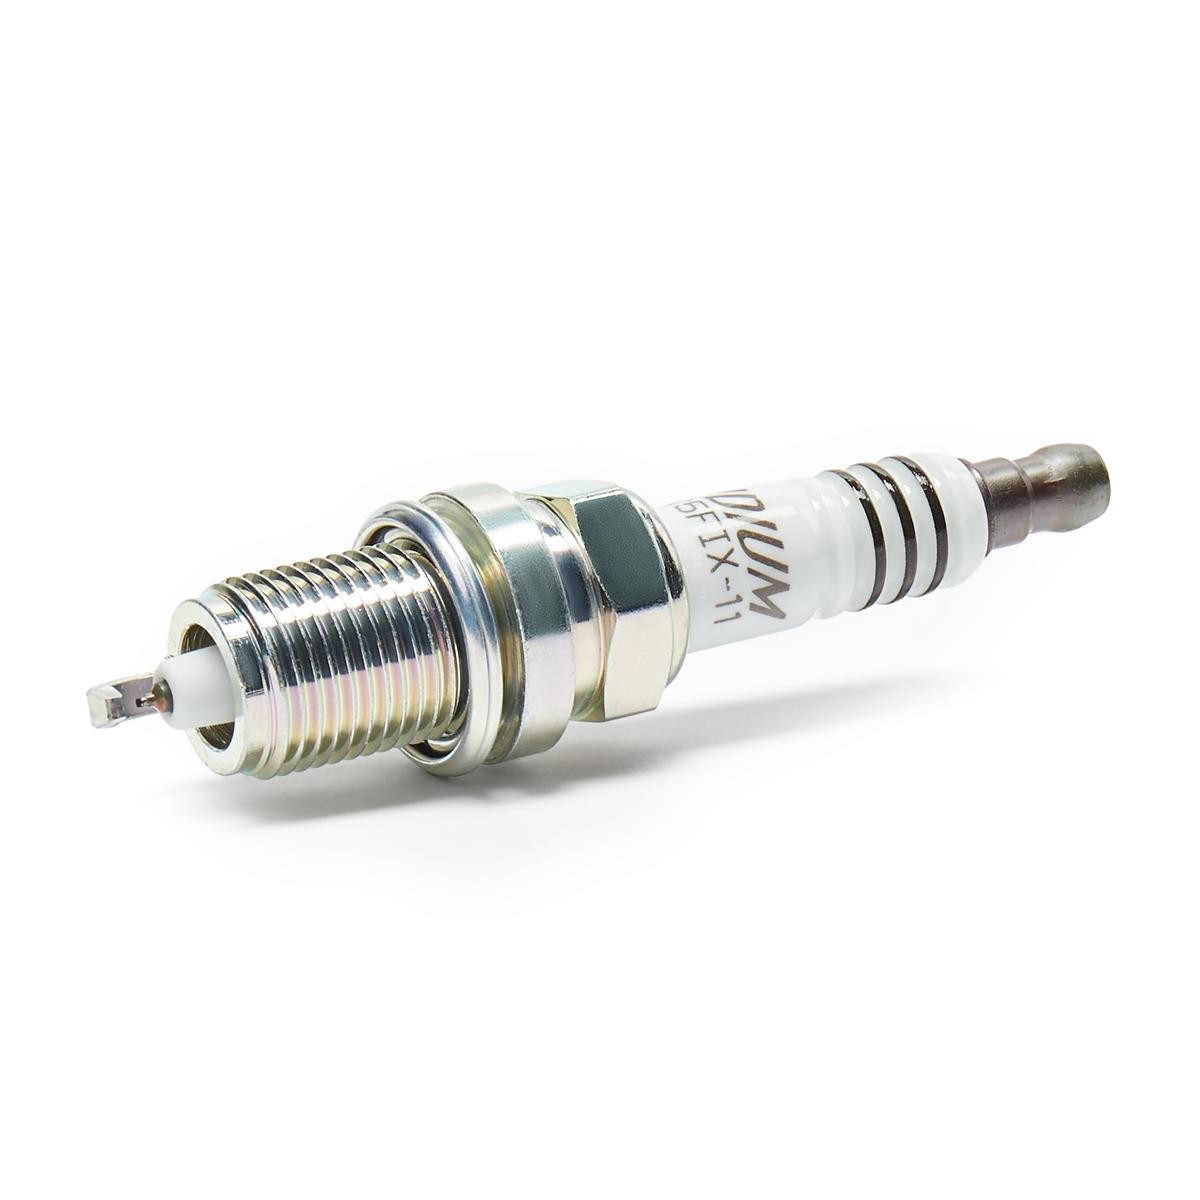 Toyota Spark plug NGK ZFR5FIX-11 at a good price